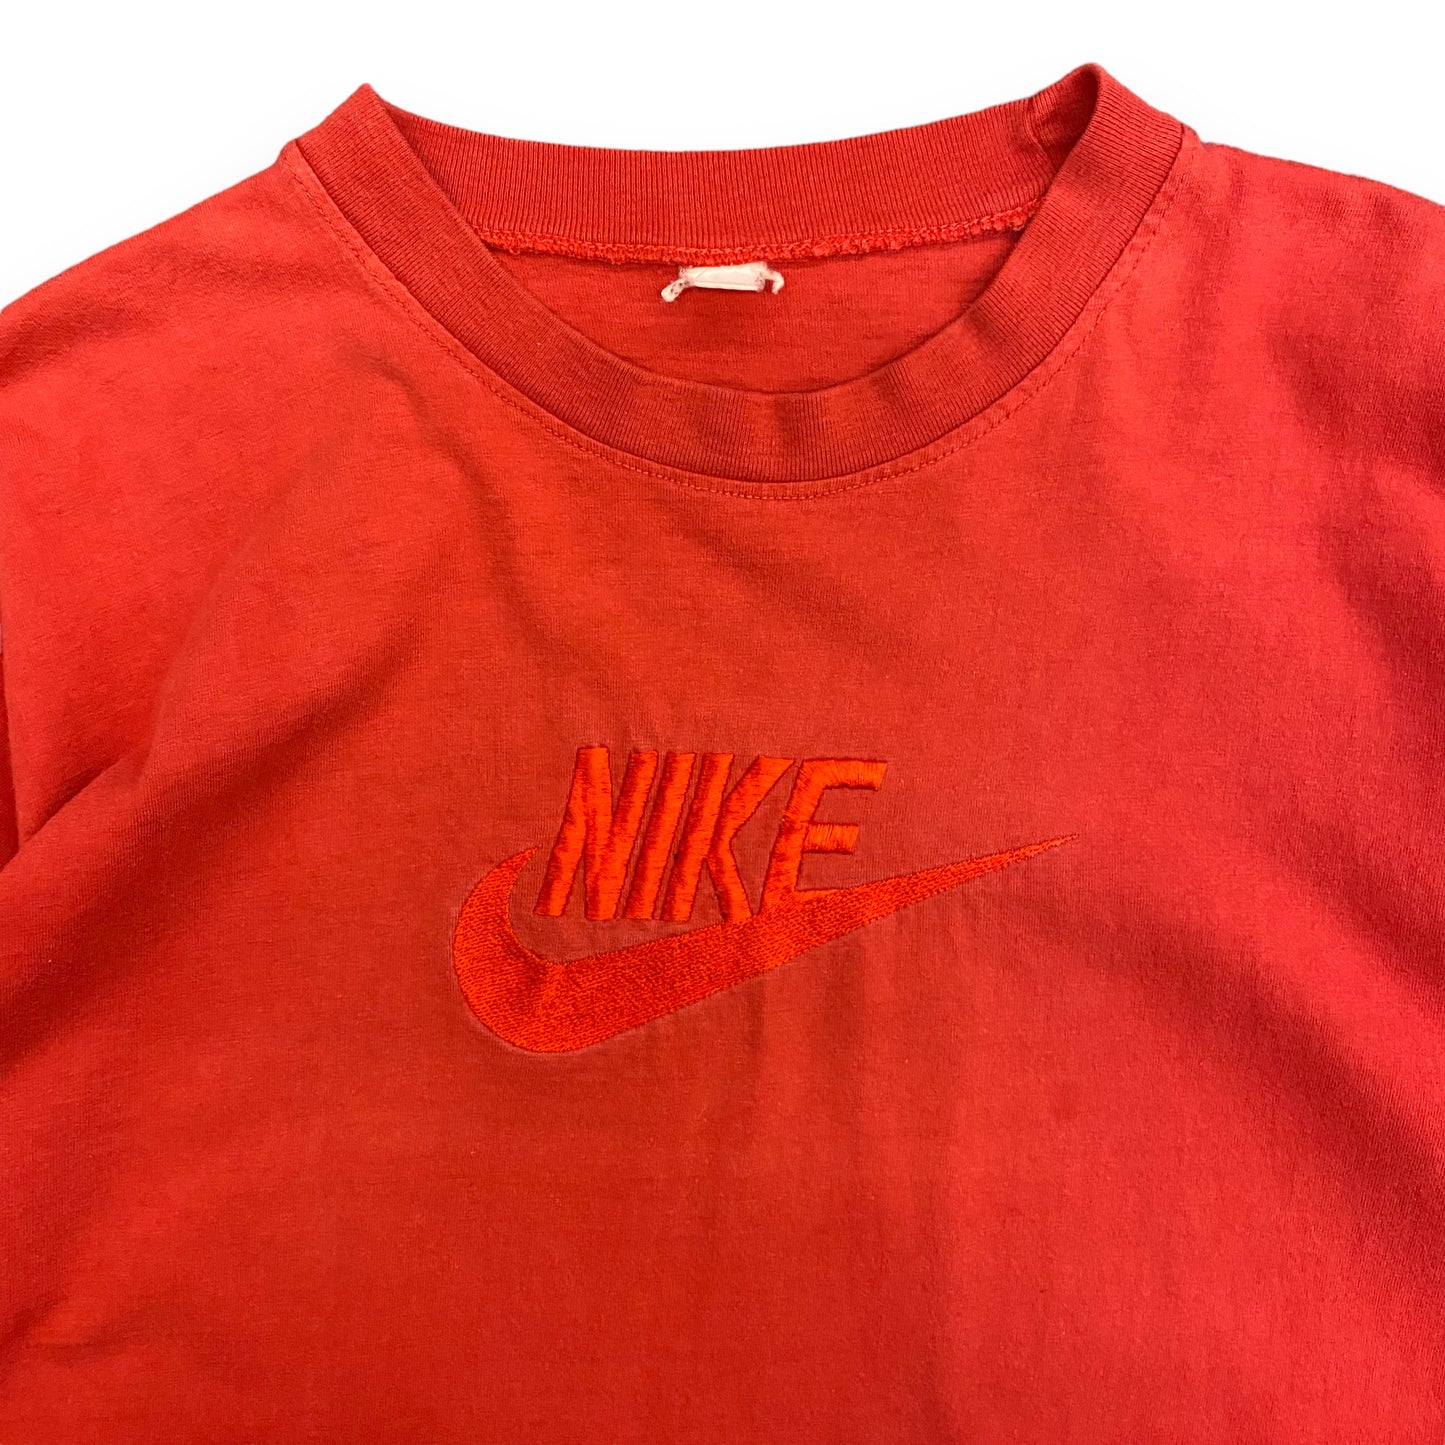 Vintage 80s/90s Nike Bootleg Embroidered Tee - Size Large